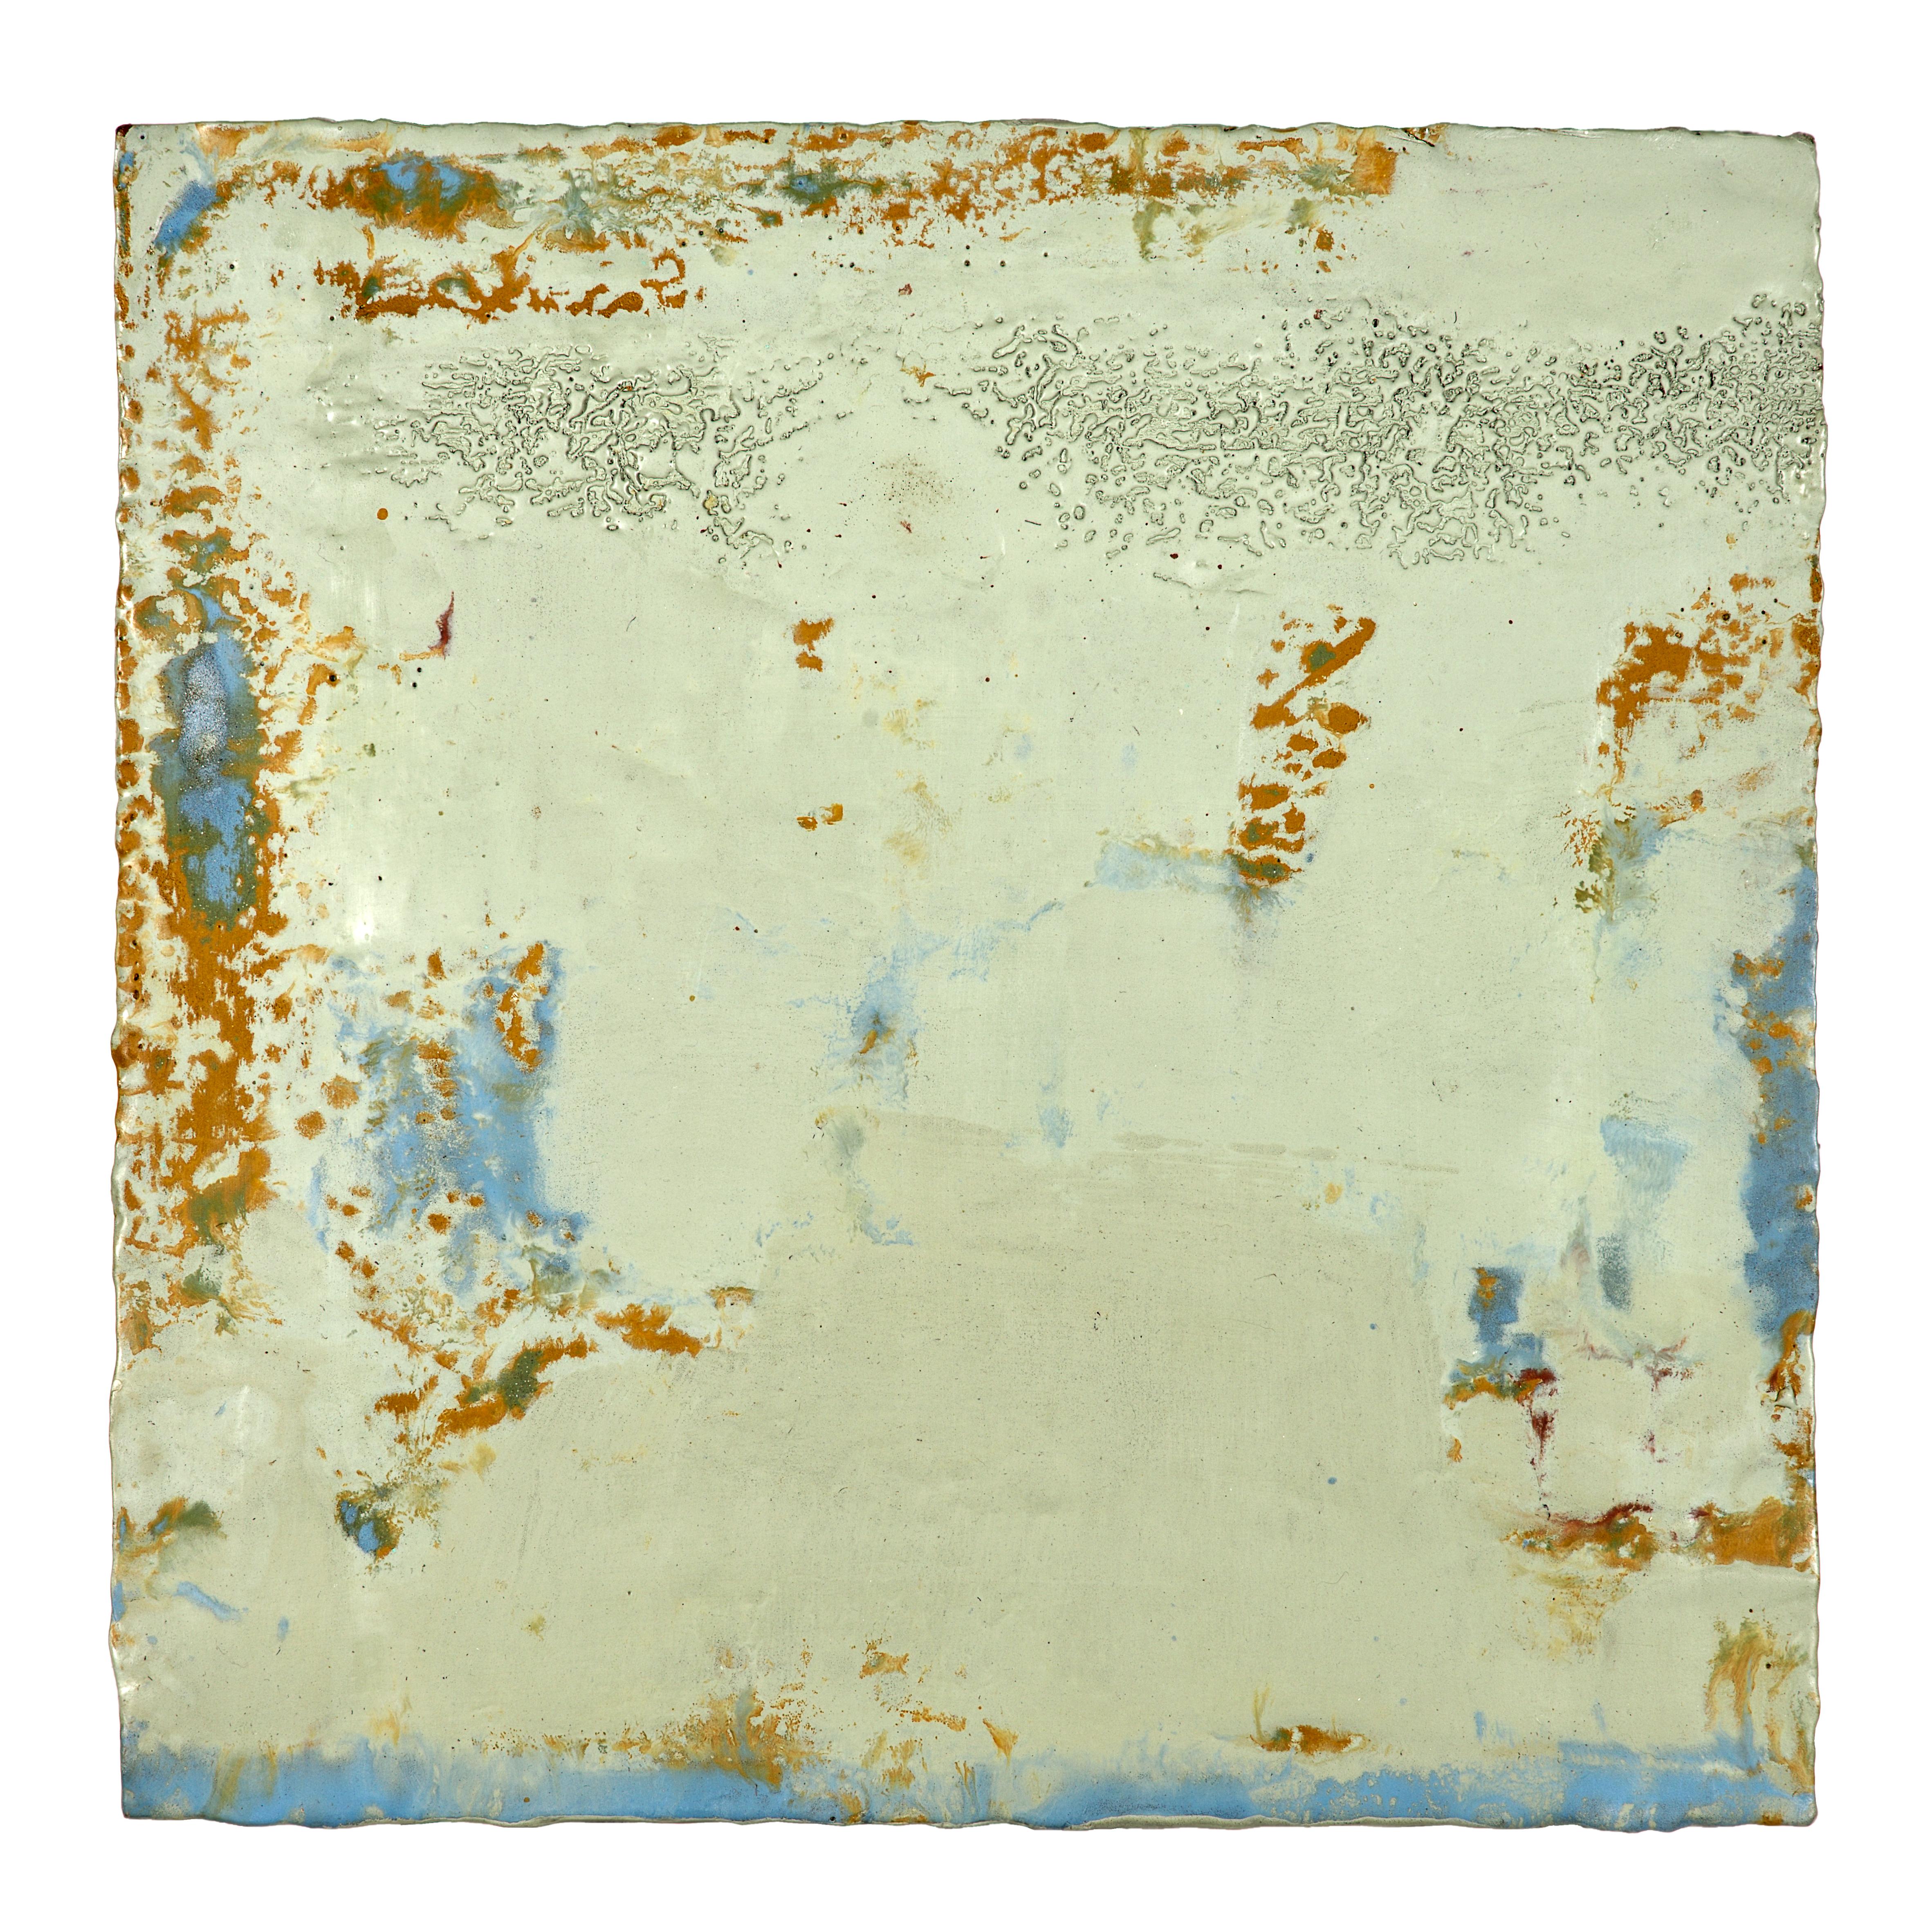 Modern Richard Hirsch Encaustic Painting of Nothing #73, 2021 For Sale